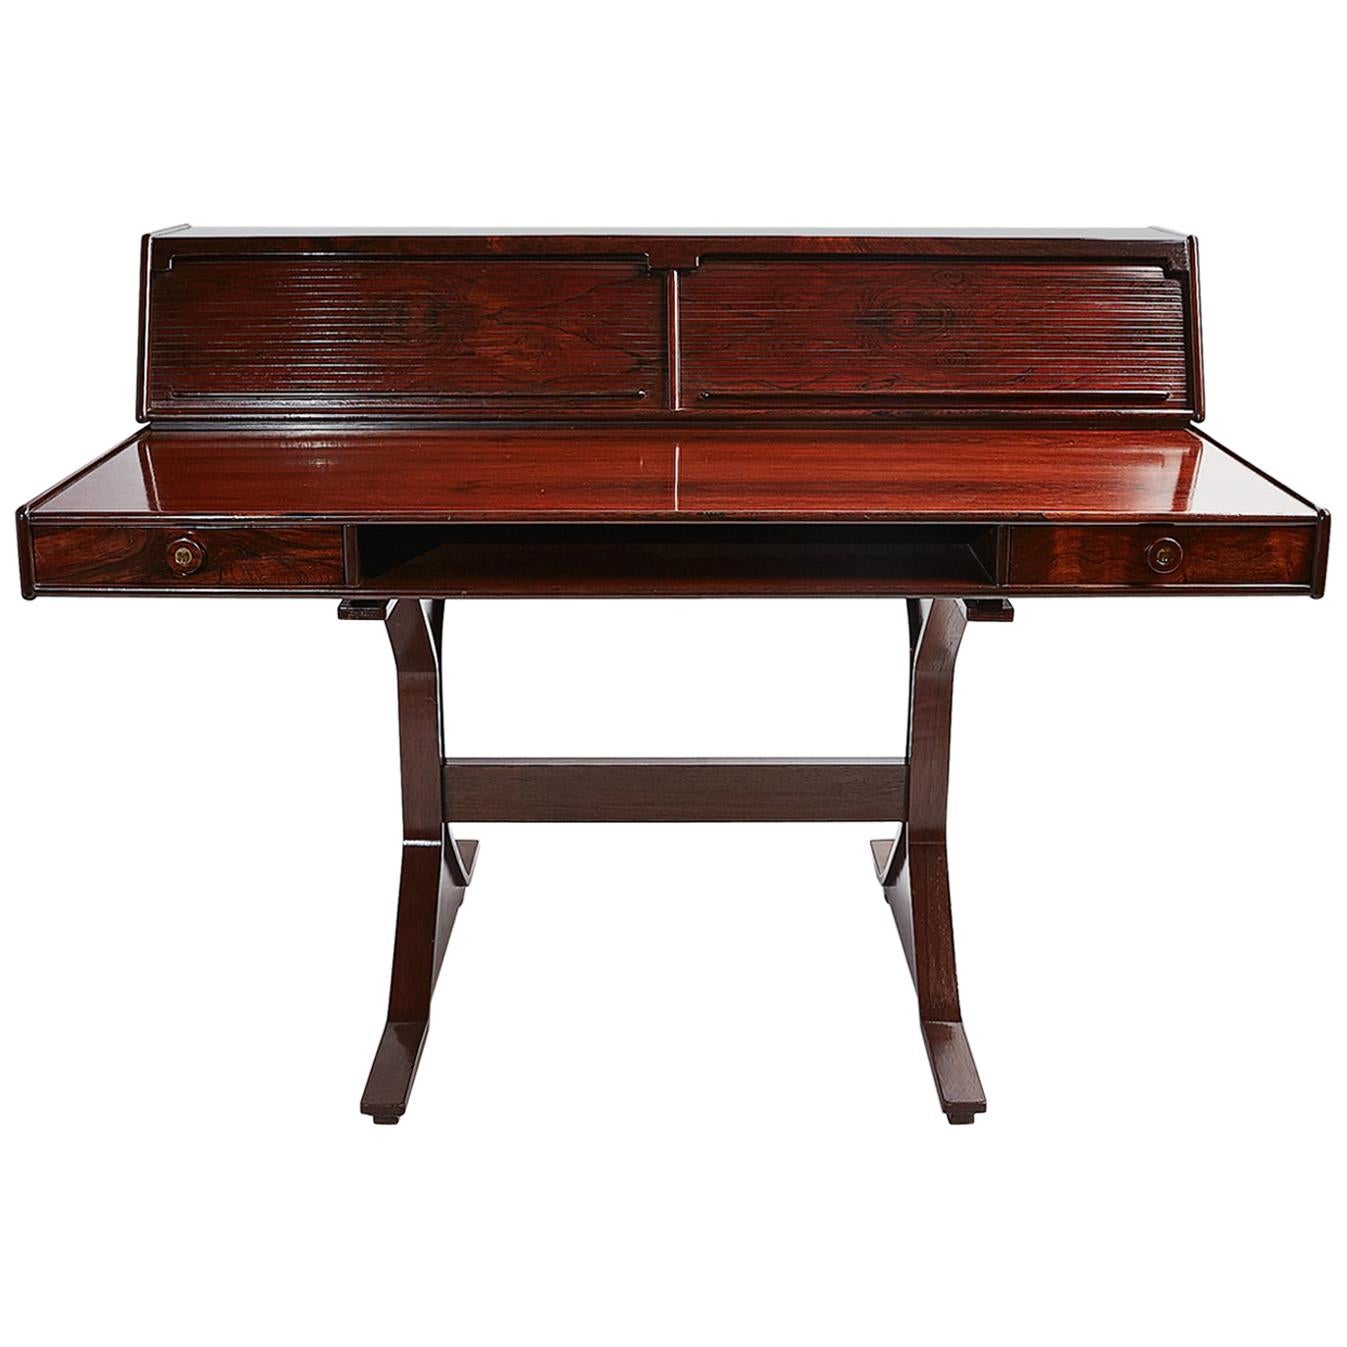 Gianfranco Frattini Rosewood Writing Desk Manufactured by Bernini, Italy, 1957 For Sale